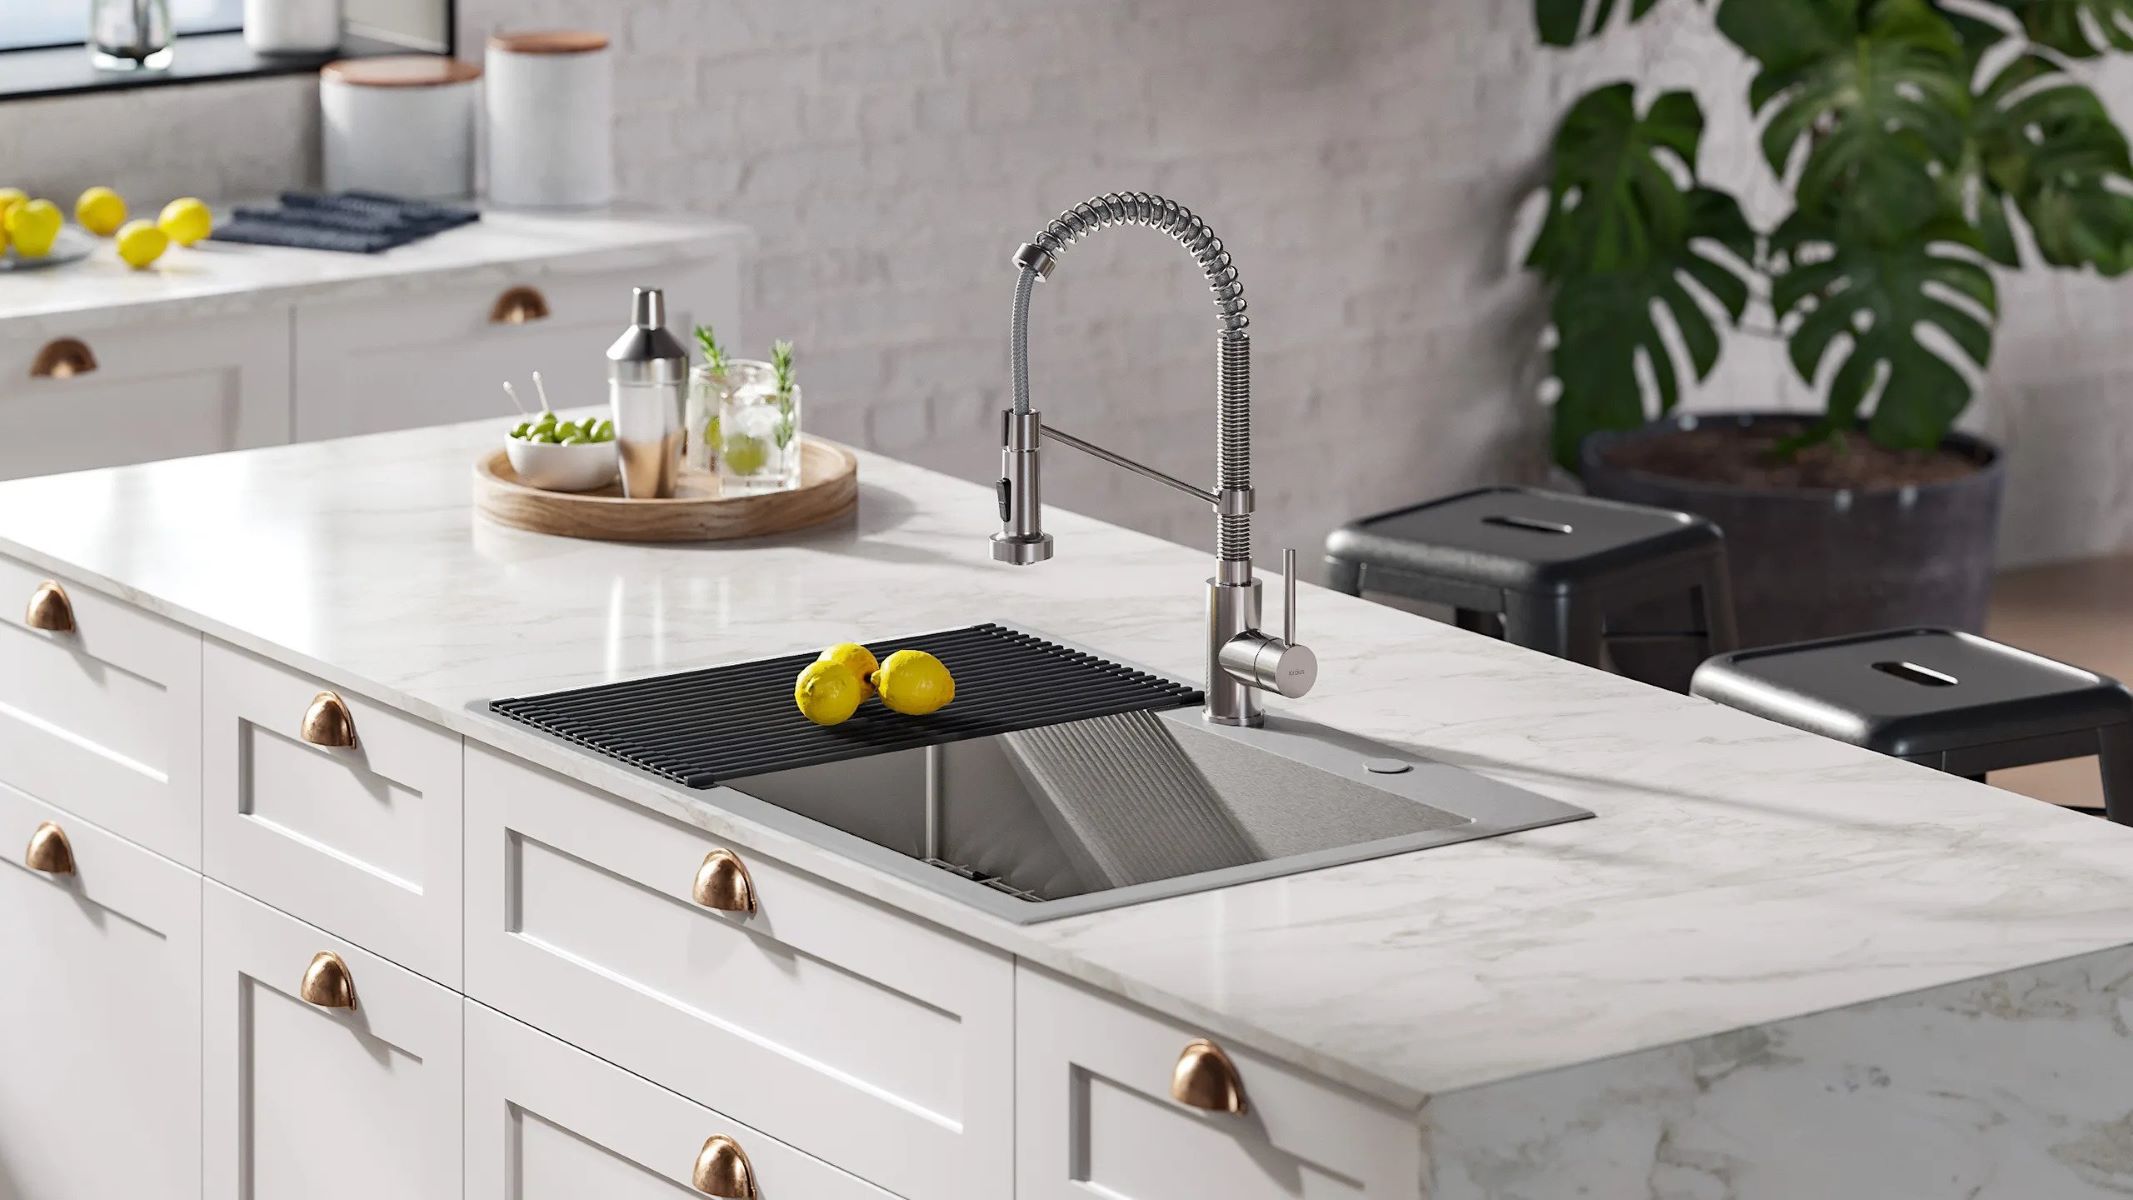 How To Install Top Mount Sink On Granite Countertops